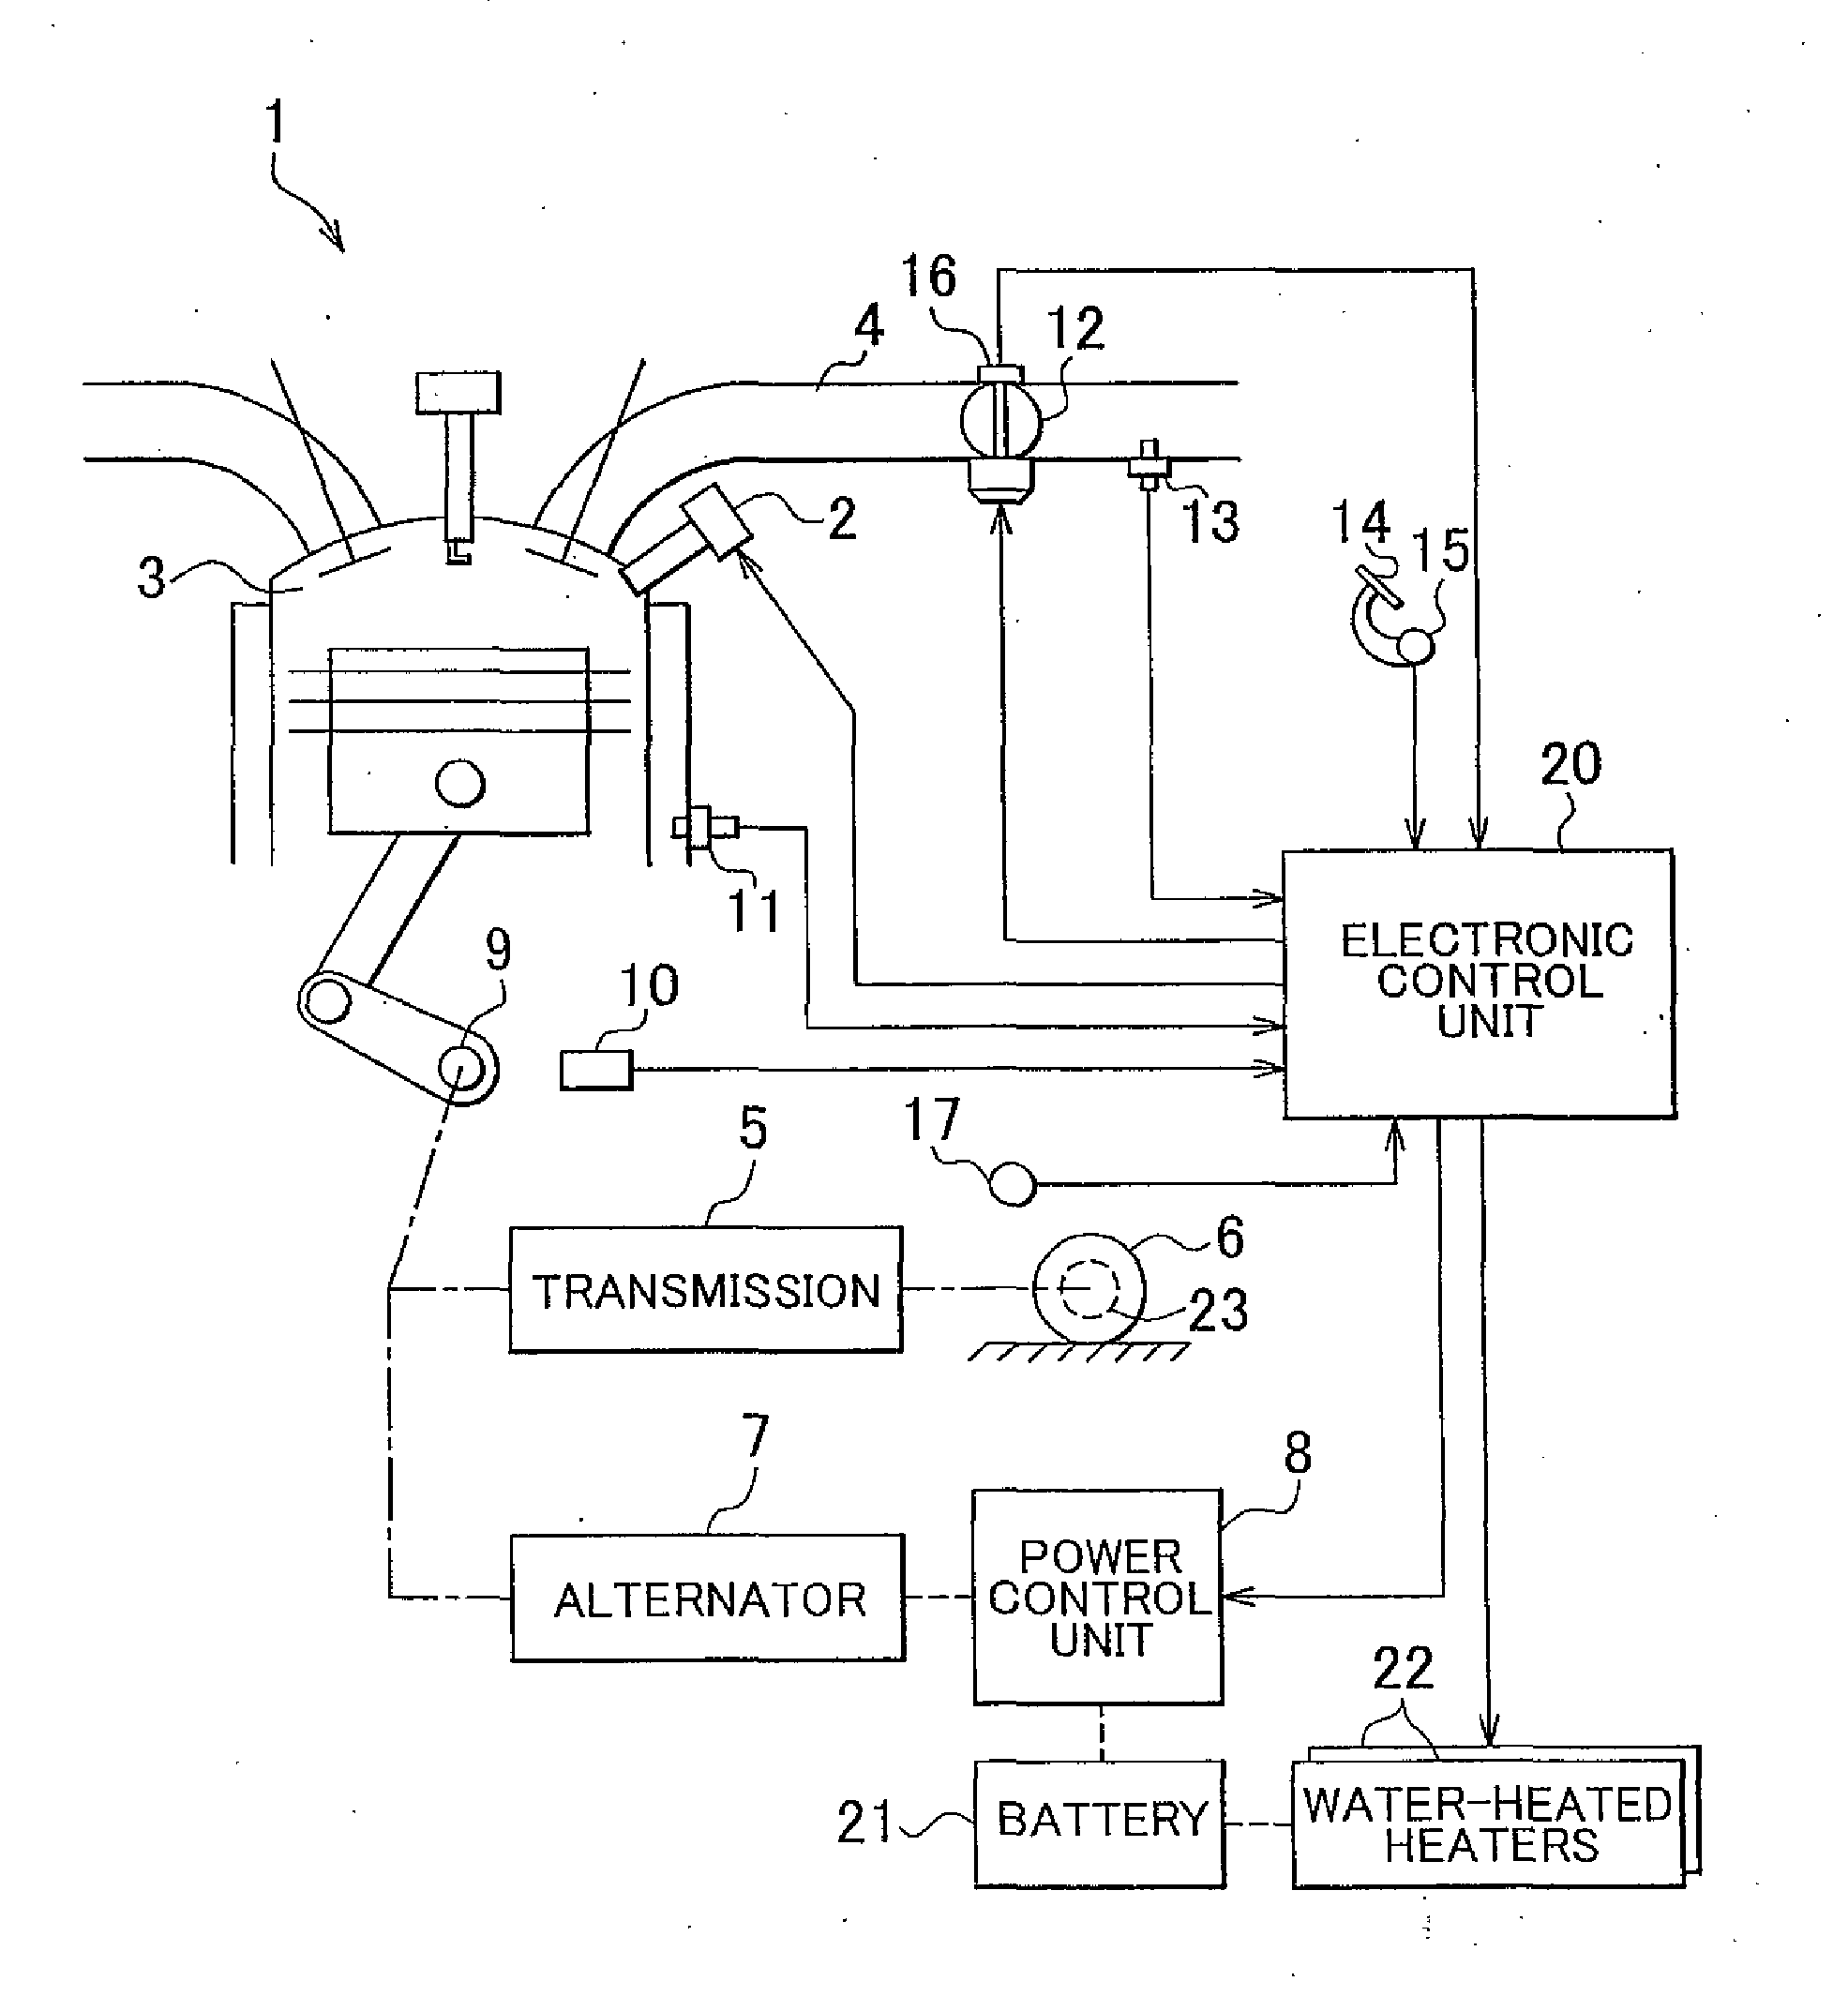 Control apparatus and method of controlling internal combustion engine mounted on vehicle